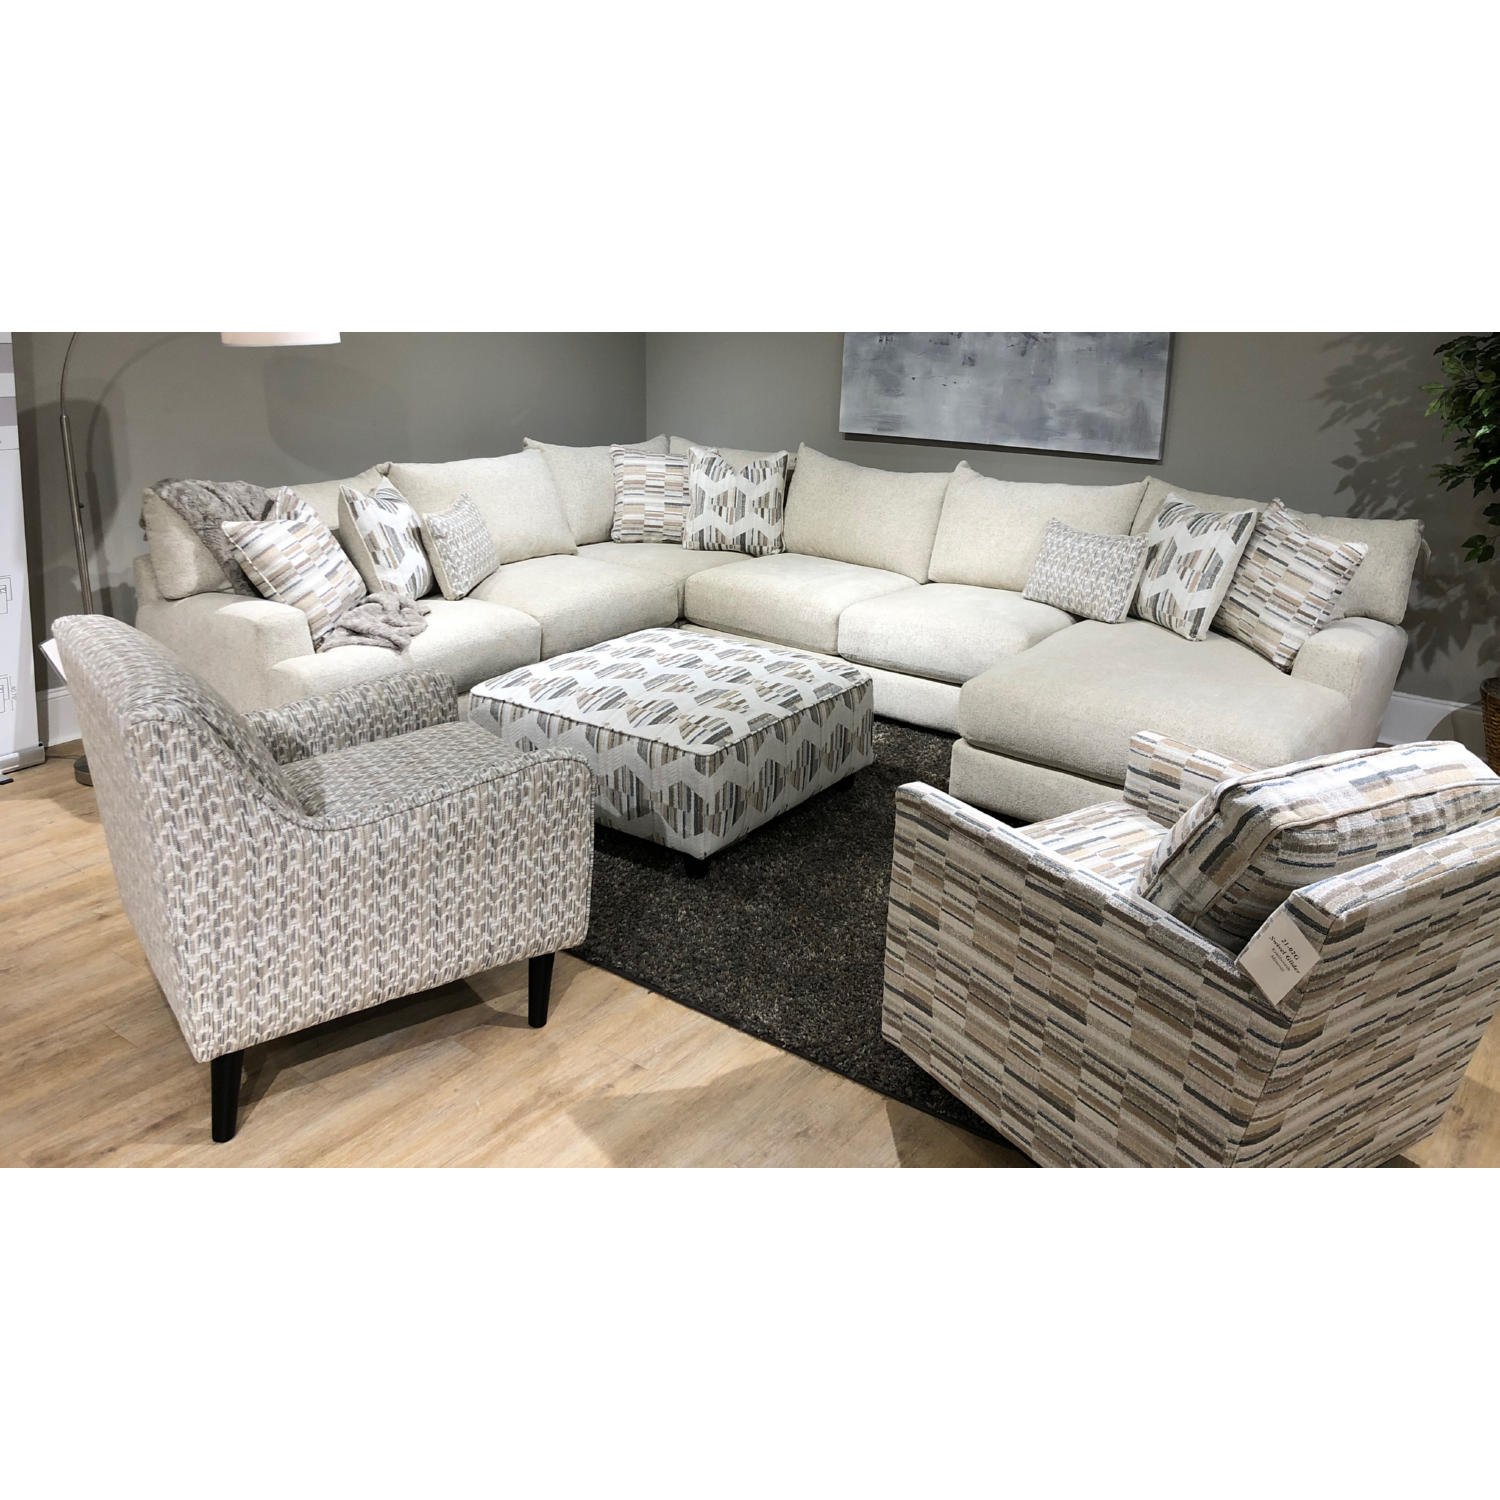 Sectional Sofa In Mare Ivory Fabric